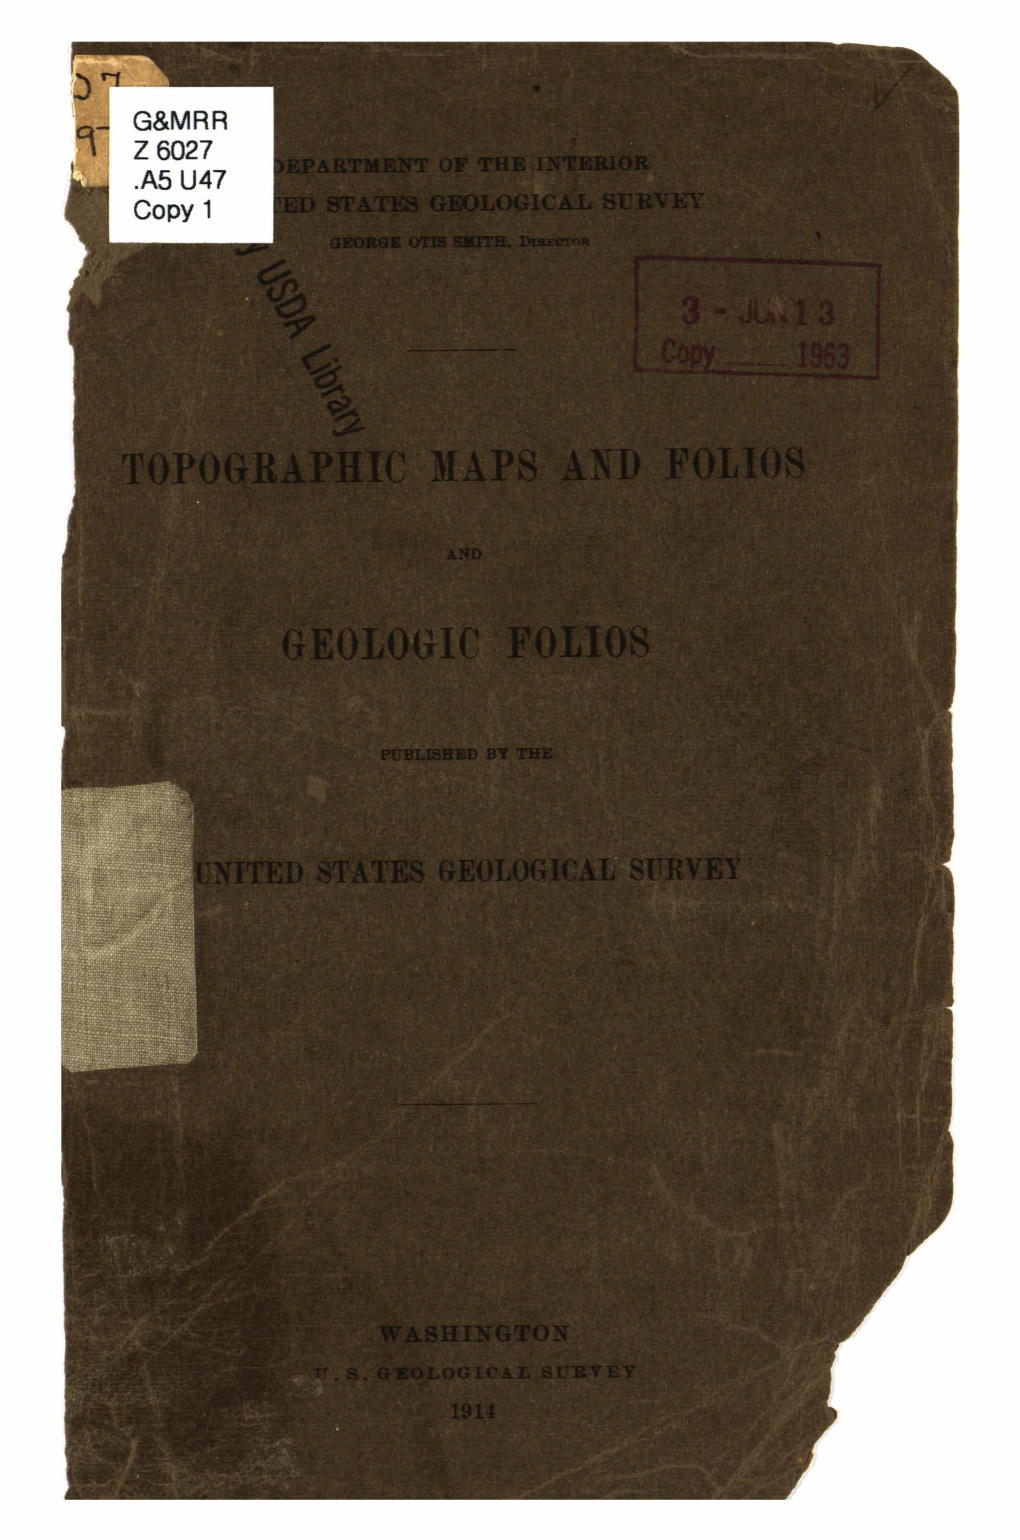 Topographic Maps and Folios and Geologic Folios